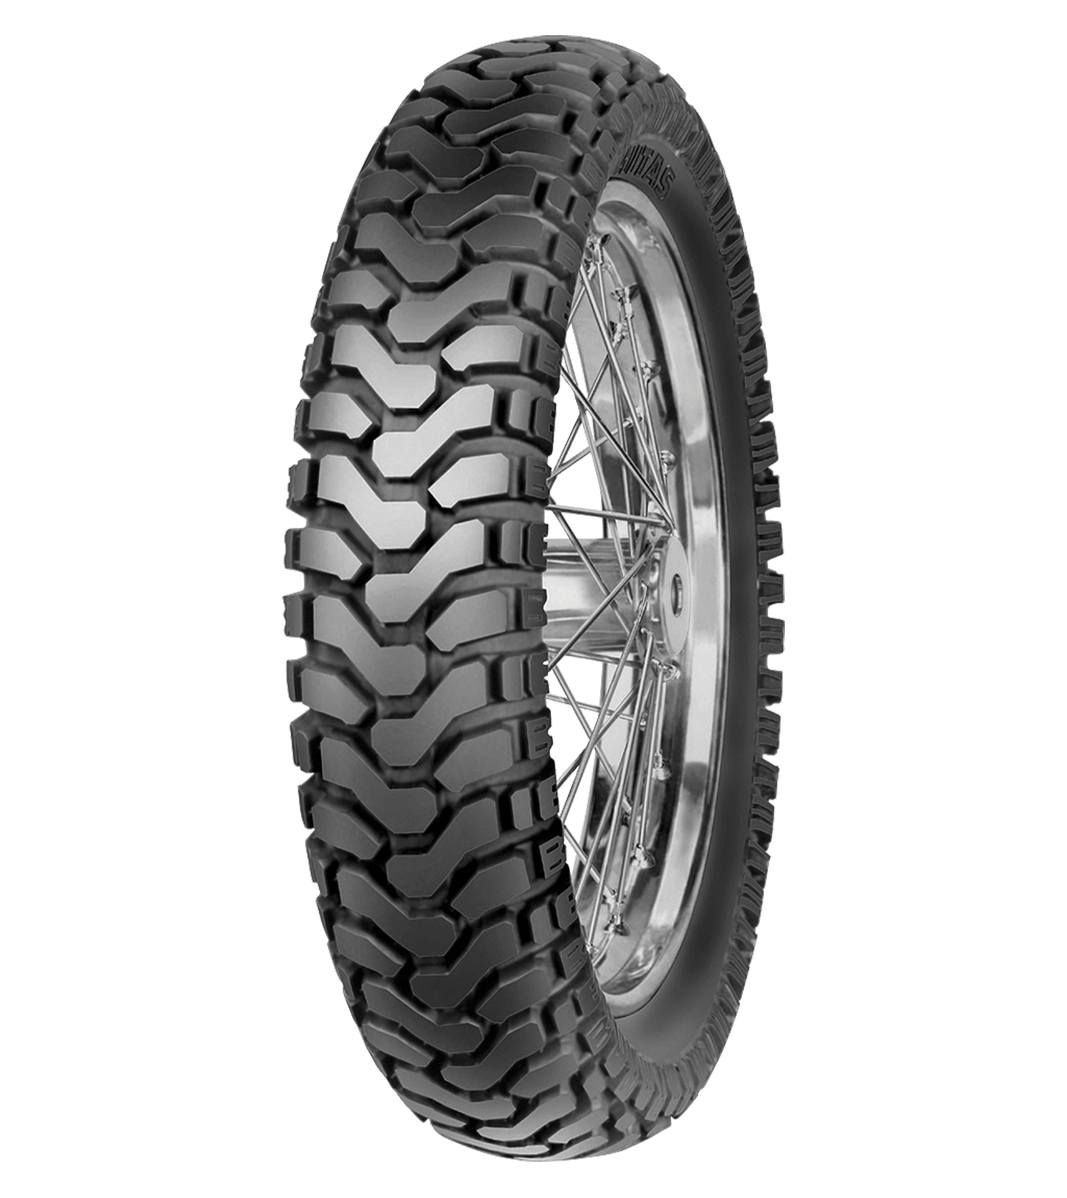 Mitas E-07 ENDURO 150/70-18 Trail OFF Trail 70T No Stripe Tubeless Rear Tire, 224404, 150/70-18, Adventure Touring, E Series, E-07 Enduro, Rear, Trail, Trail OFF, Tires - Imported and distributed in North & South America by Lindeco Genuine Powersports - Premier Powersports Equipment and Accessories for Motorcycle Enthusiasts, Professional Riders and Dealers.